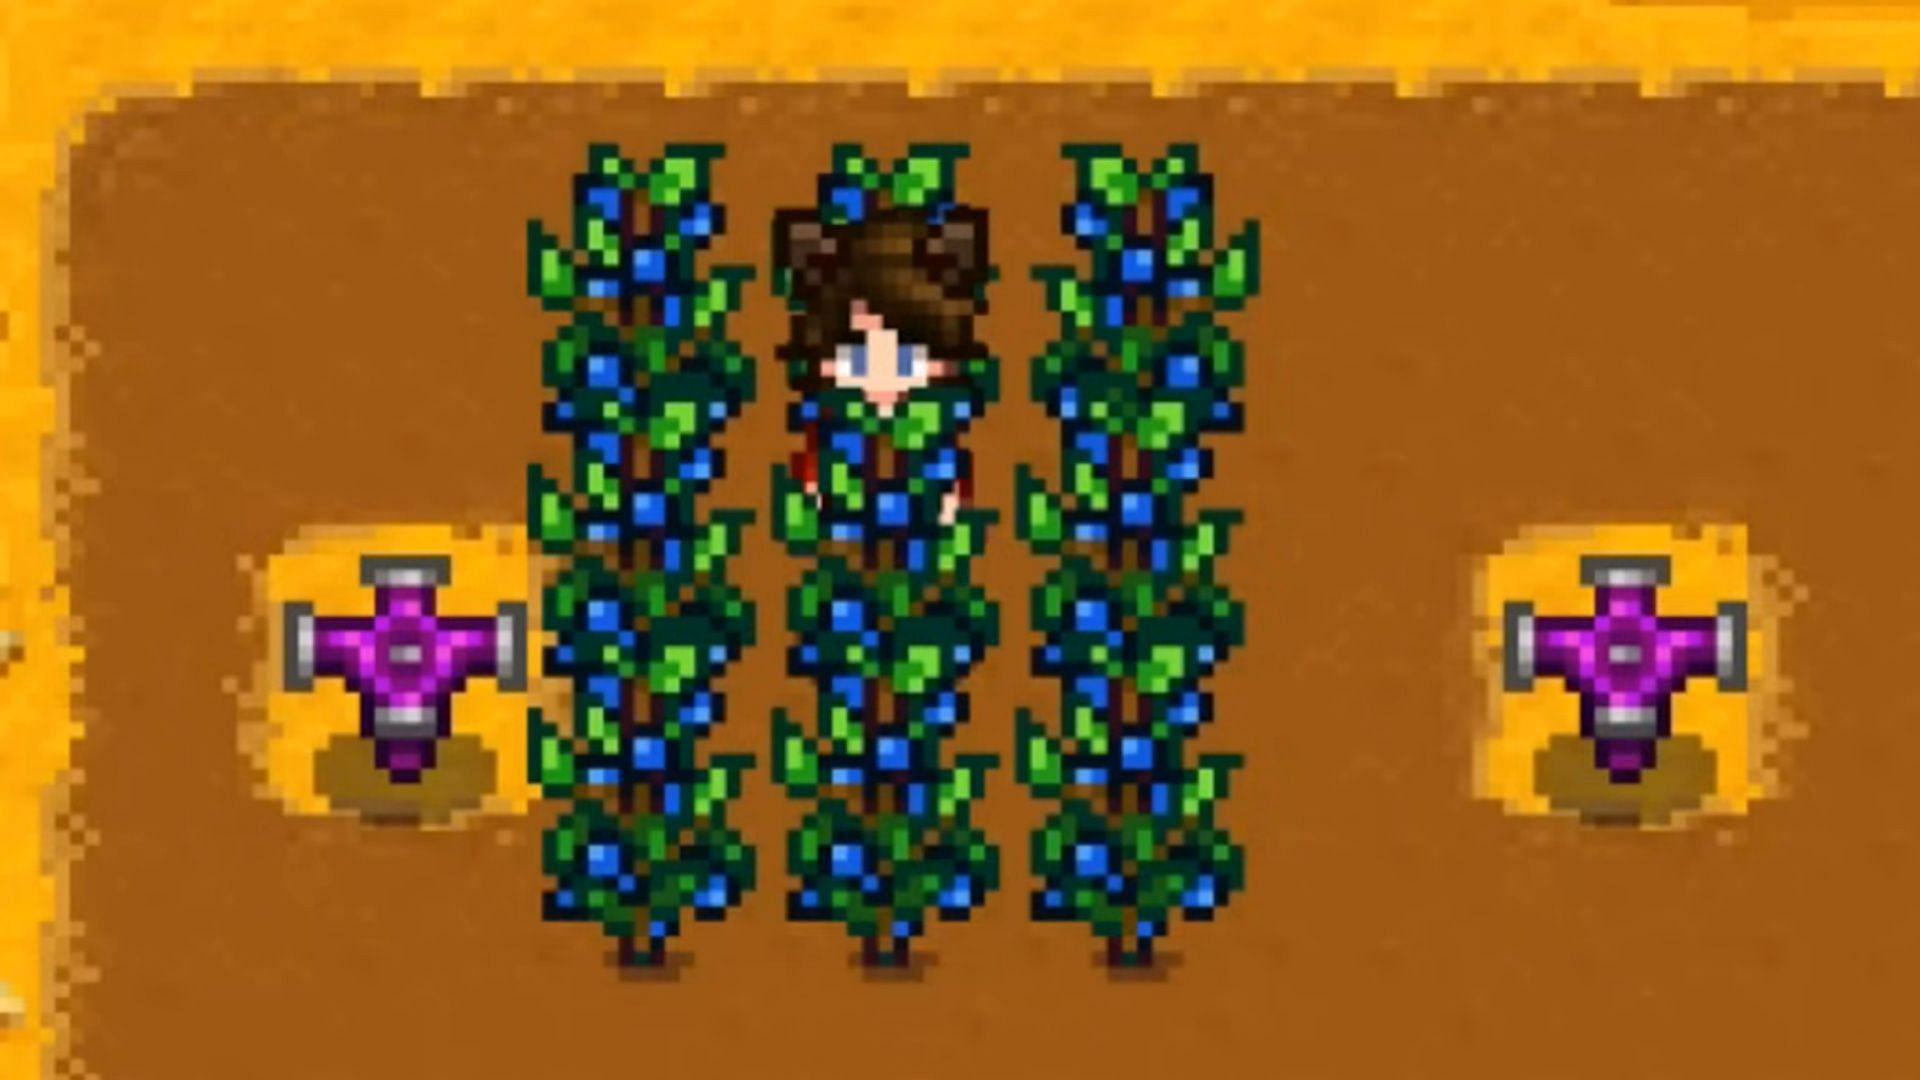 Blueberry crops in Stardew Valley (Image via ConcernedApe || YouTube: @Salmence)